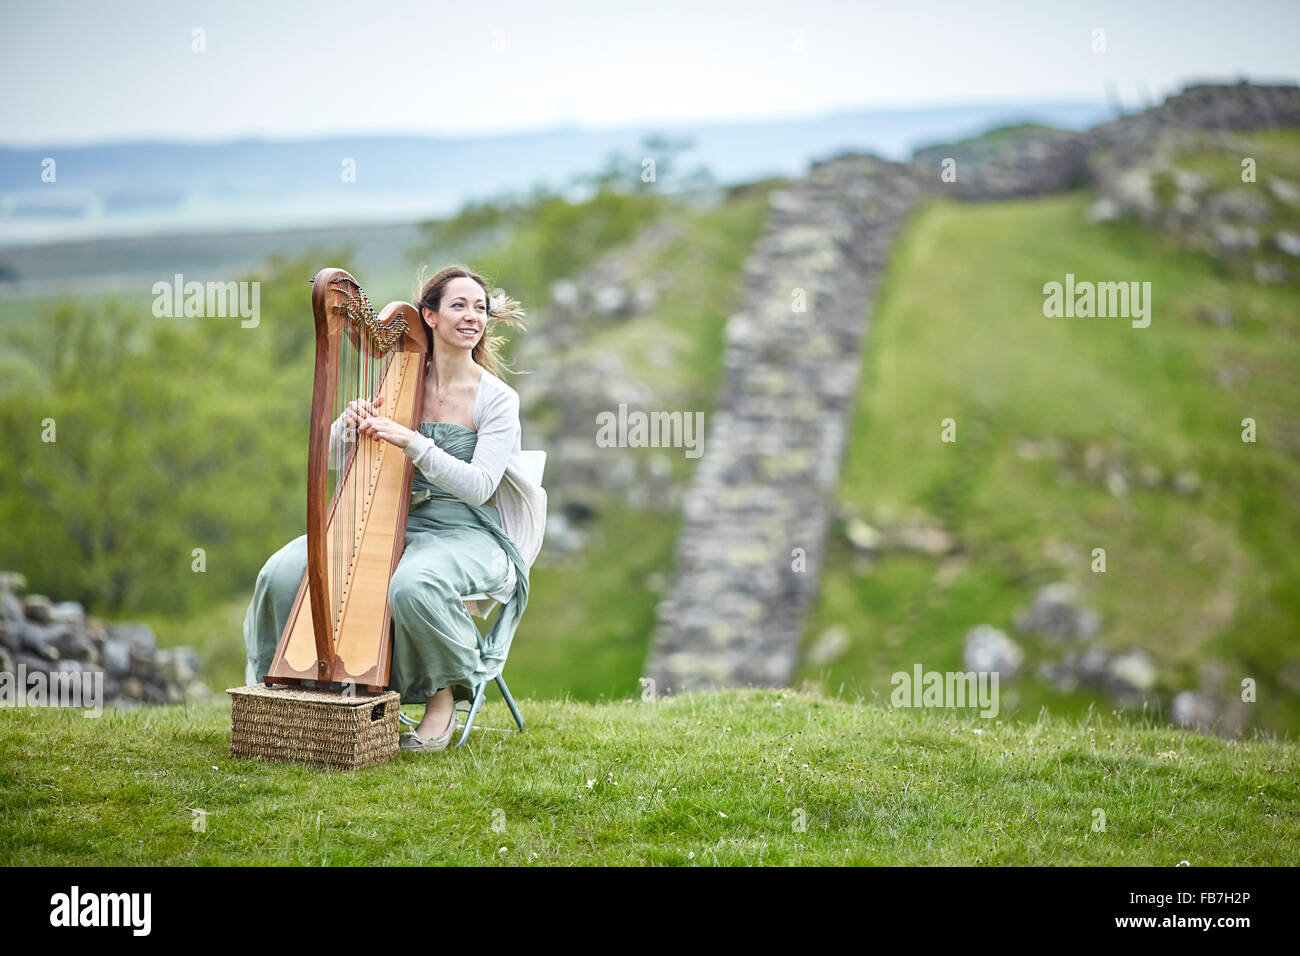 BBC Music day 'for the love of music'  Hadrian's Wall of Sound 2015 at Cumbria and Northumberland Gilsland  harp player landscape Stock Photo